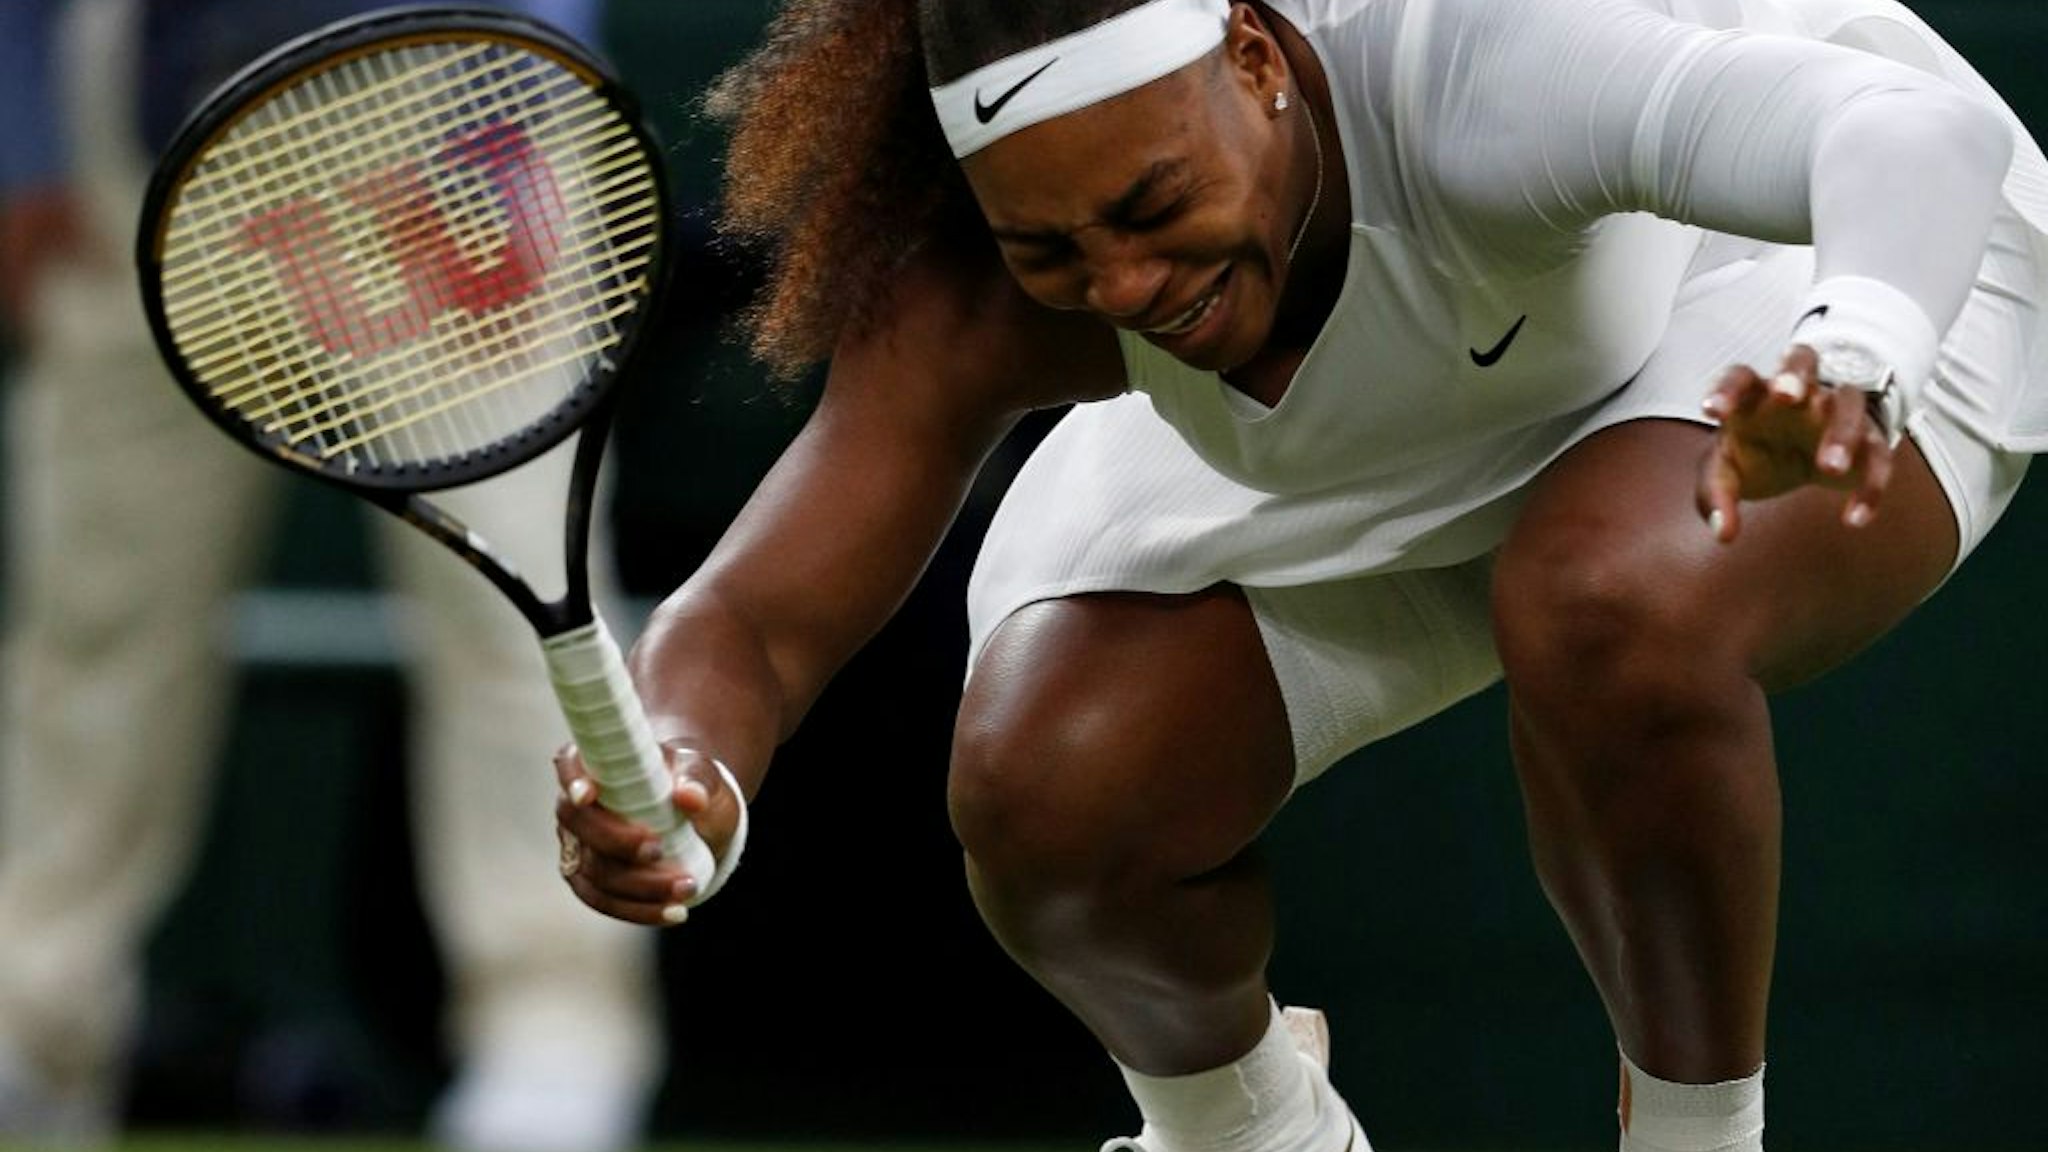 US player Serena Williams reacts as she pulls-up injured before withdrawing from her women's singles first round match against Belarus's Aliaksandra Sasnovich on the second day of the 2021 Wimbledon Championships at The All England Tennis Club in Wimbledon, southwest London, on June 29, 2021. - RESTRICTED TO EDITORIAL USE (Photo by Adrian DENNIS / AFP) / RESTRICTED TO EDITORIAL USE (Photo by ADRIAN DENNIS/AFP via Getty Images)